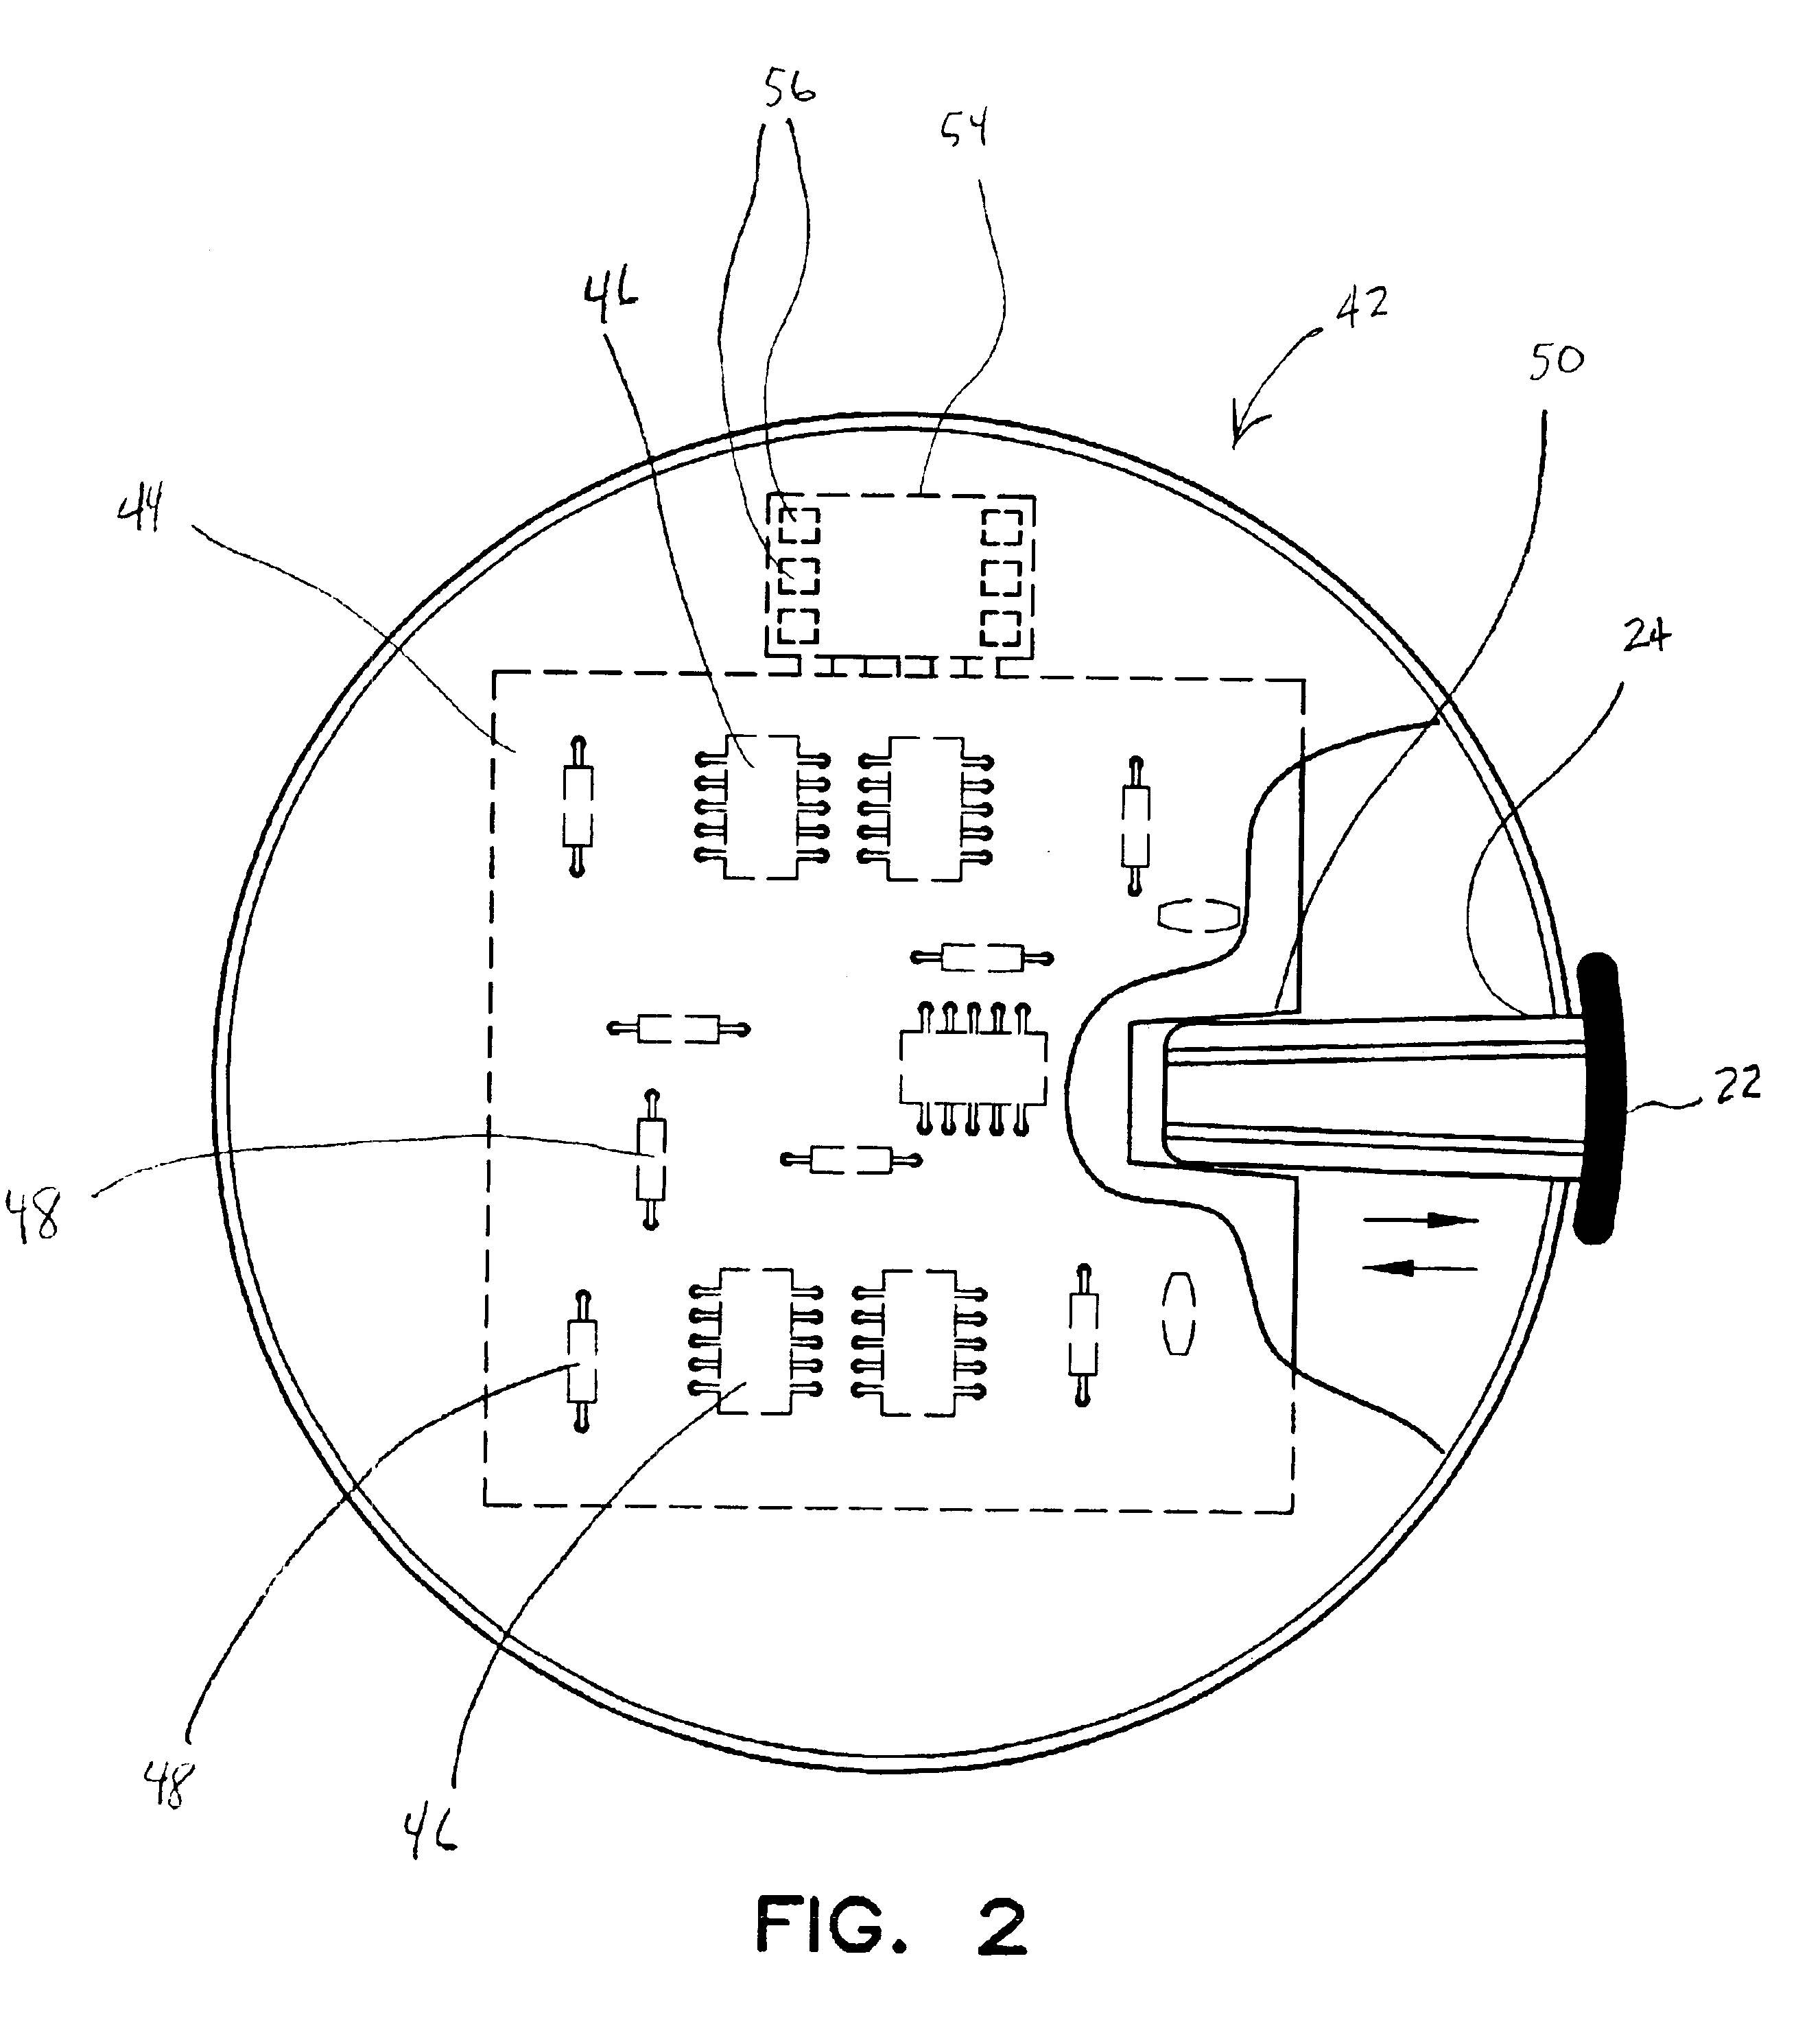 Portable communications device